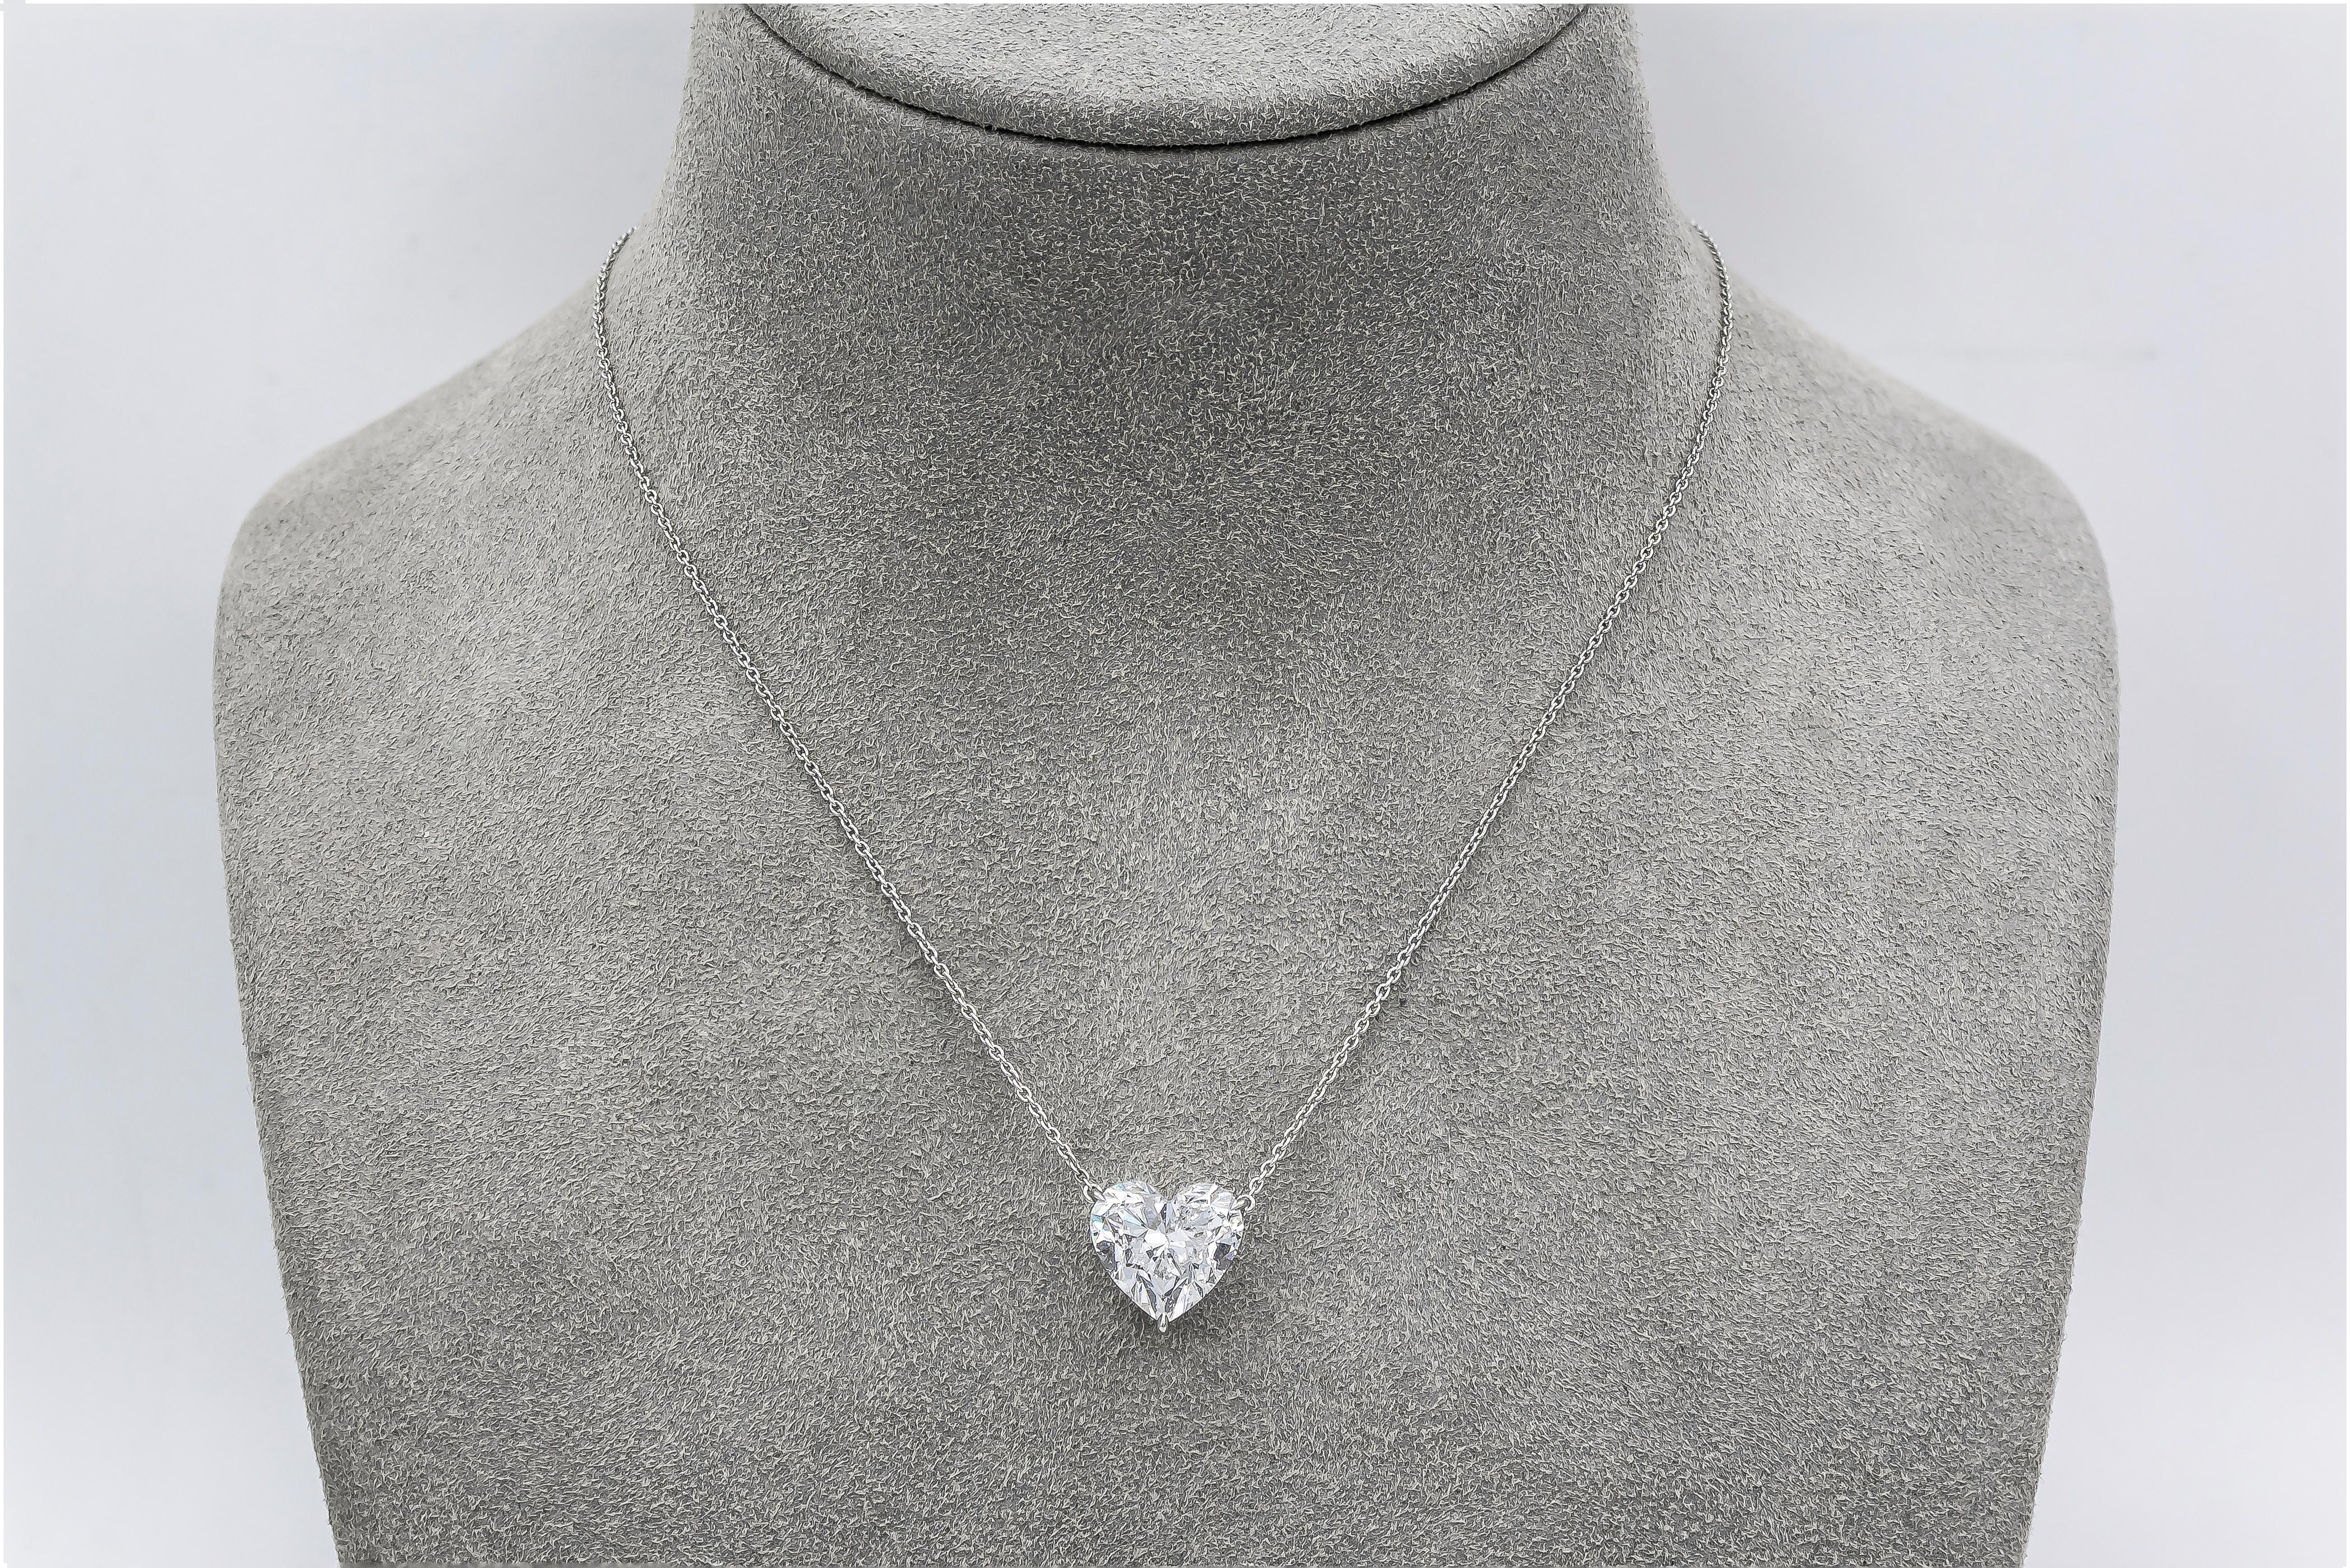 A traditional and classic pendant necklace style showcasing a 5.23 carat heart shape diamond, set in a polished platinum mounting. EGL USA certified the diamond as D color, SI2 clarity. 

Style available in different price ranges. Prices are based